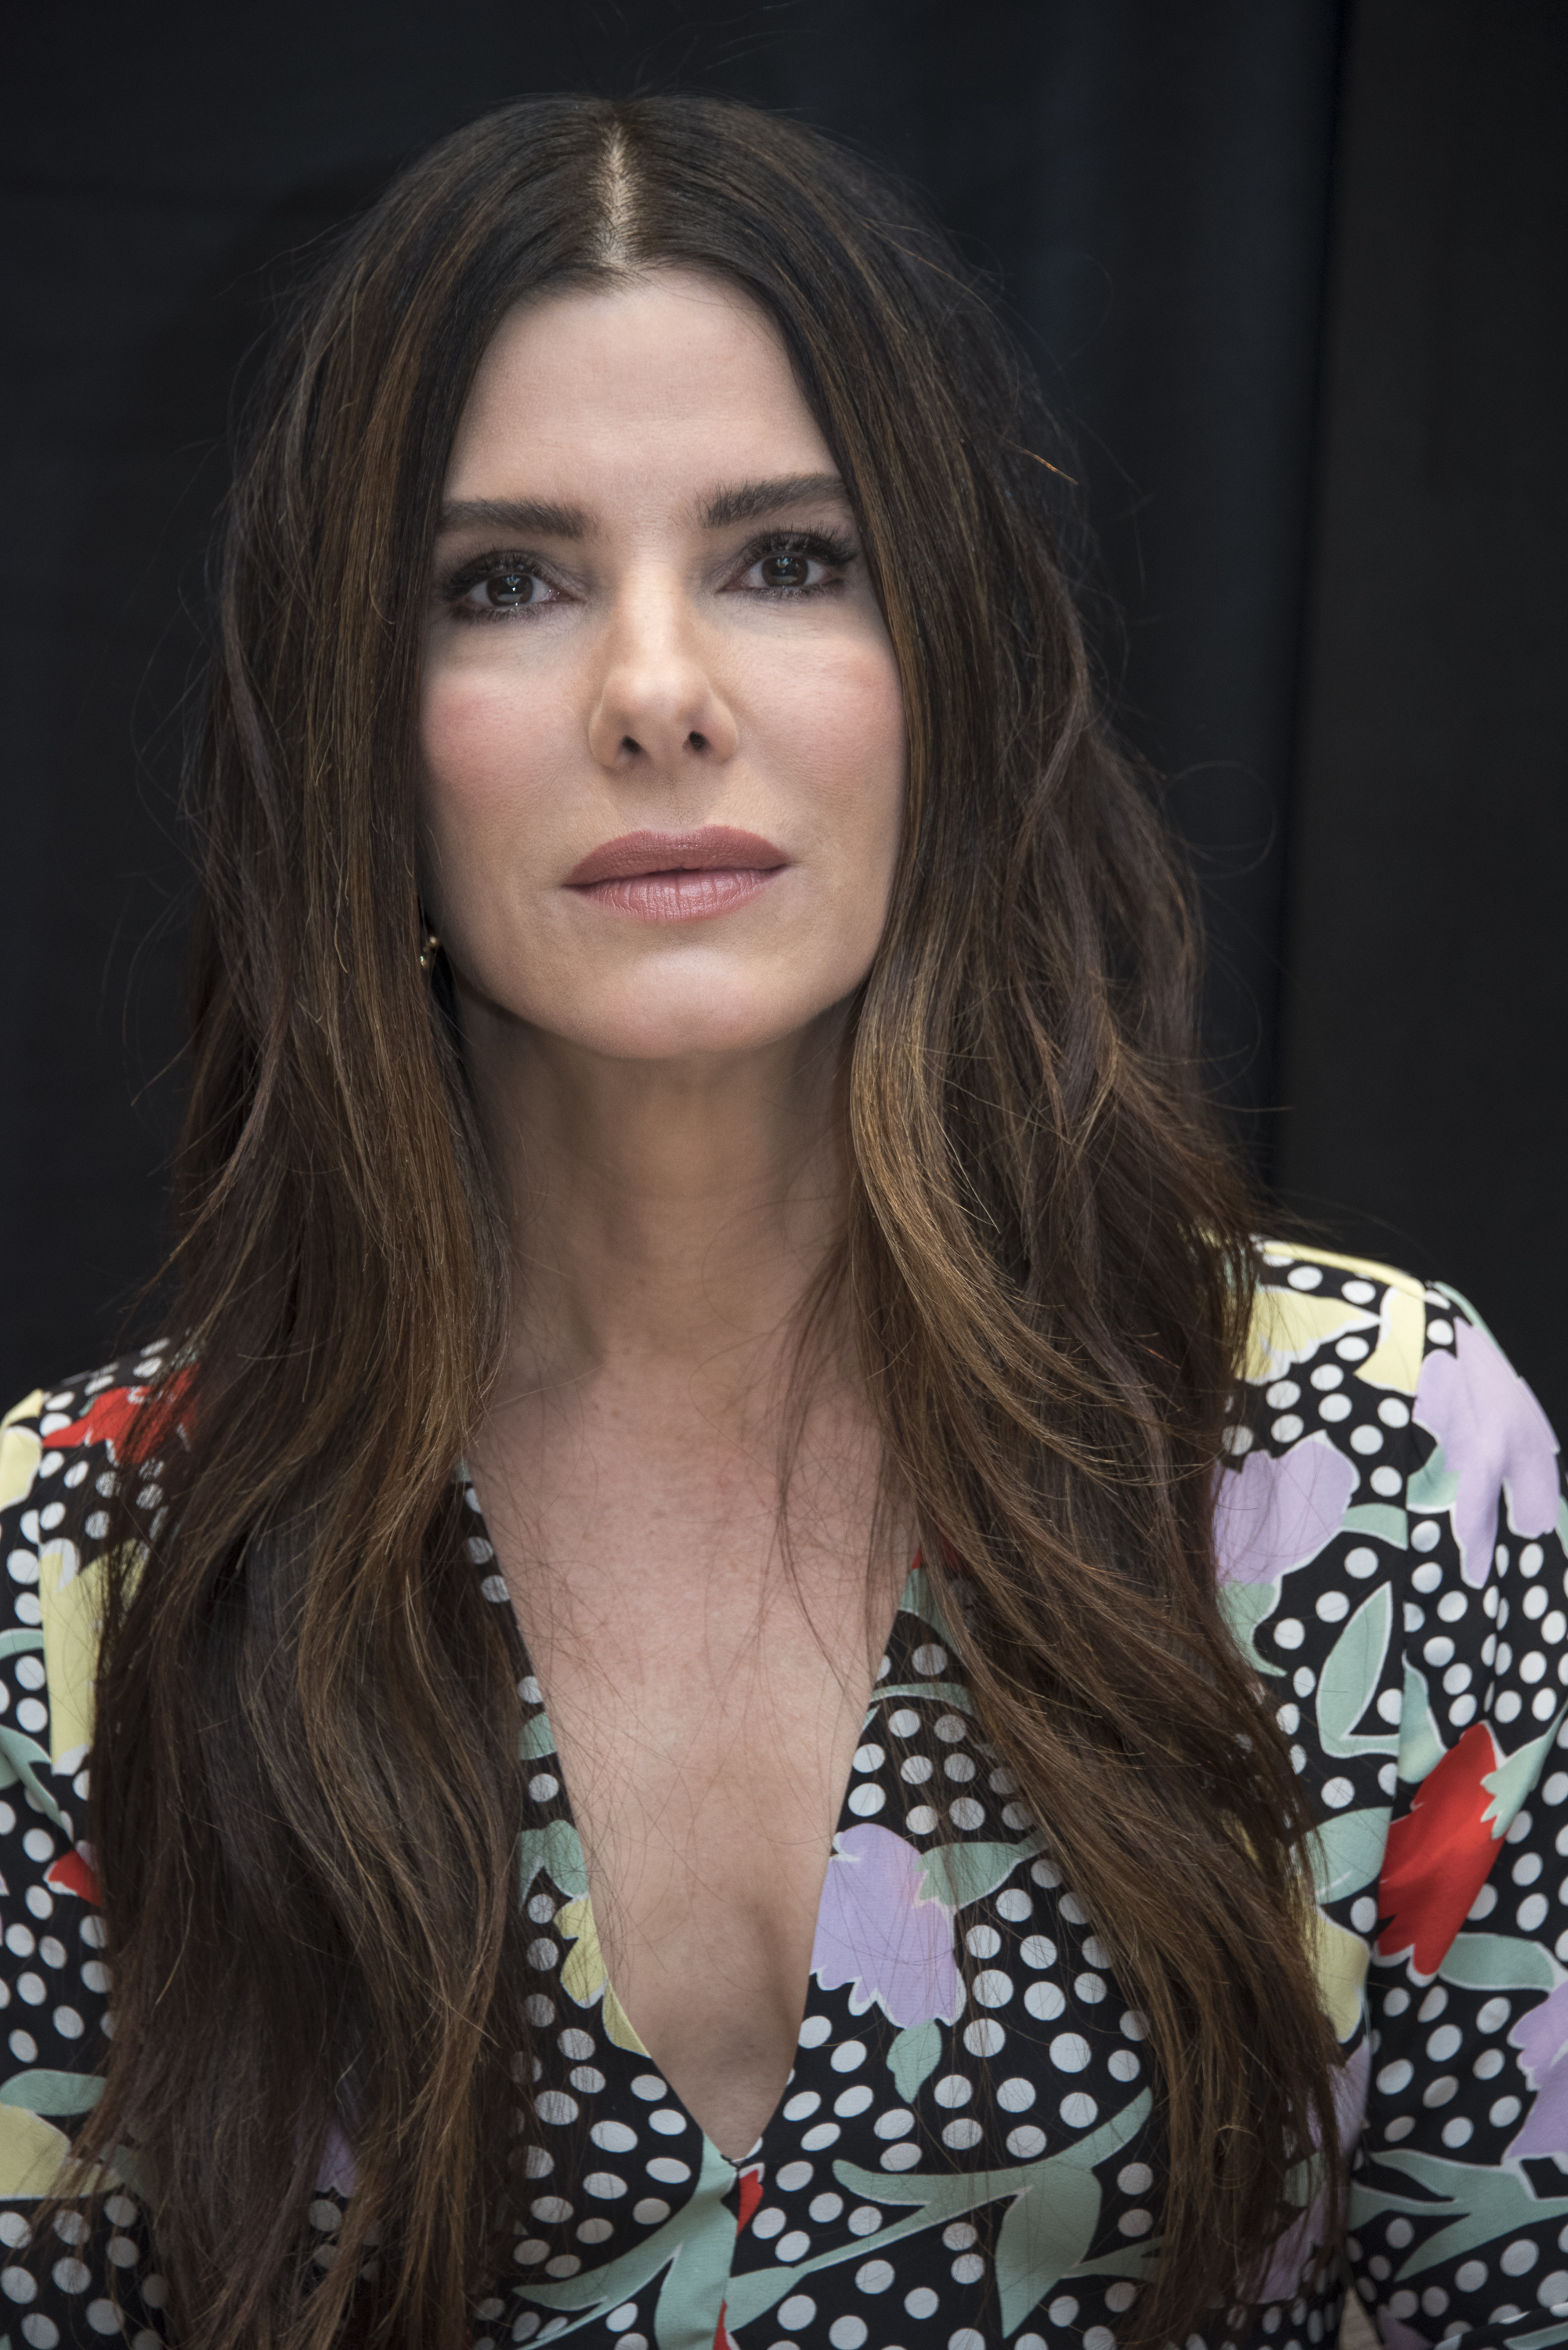 Sandra Bullock at the "Ocean's 8" Press Conference at the Whitby Hotel on May 24, 2018 in New York City | Source: Getty Images